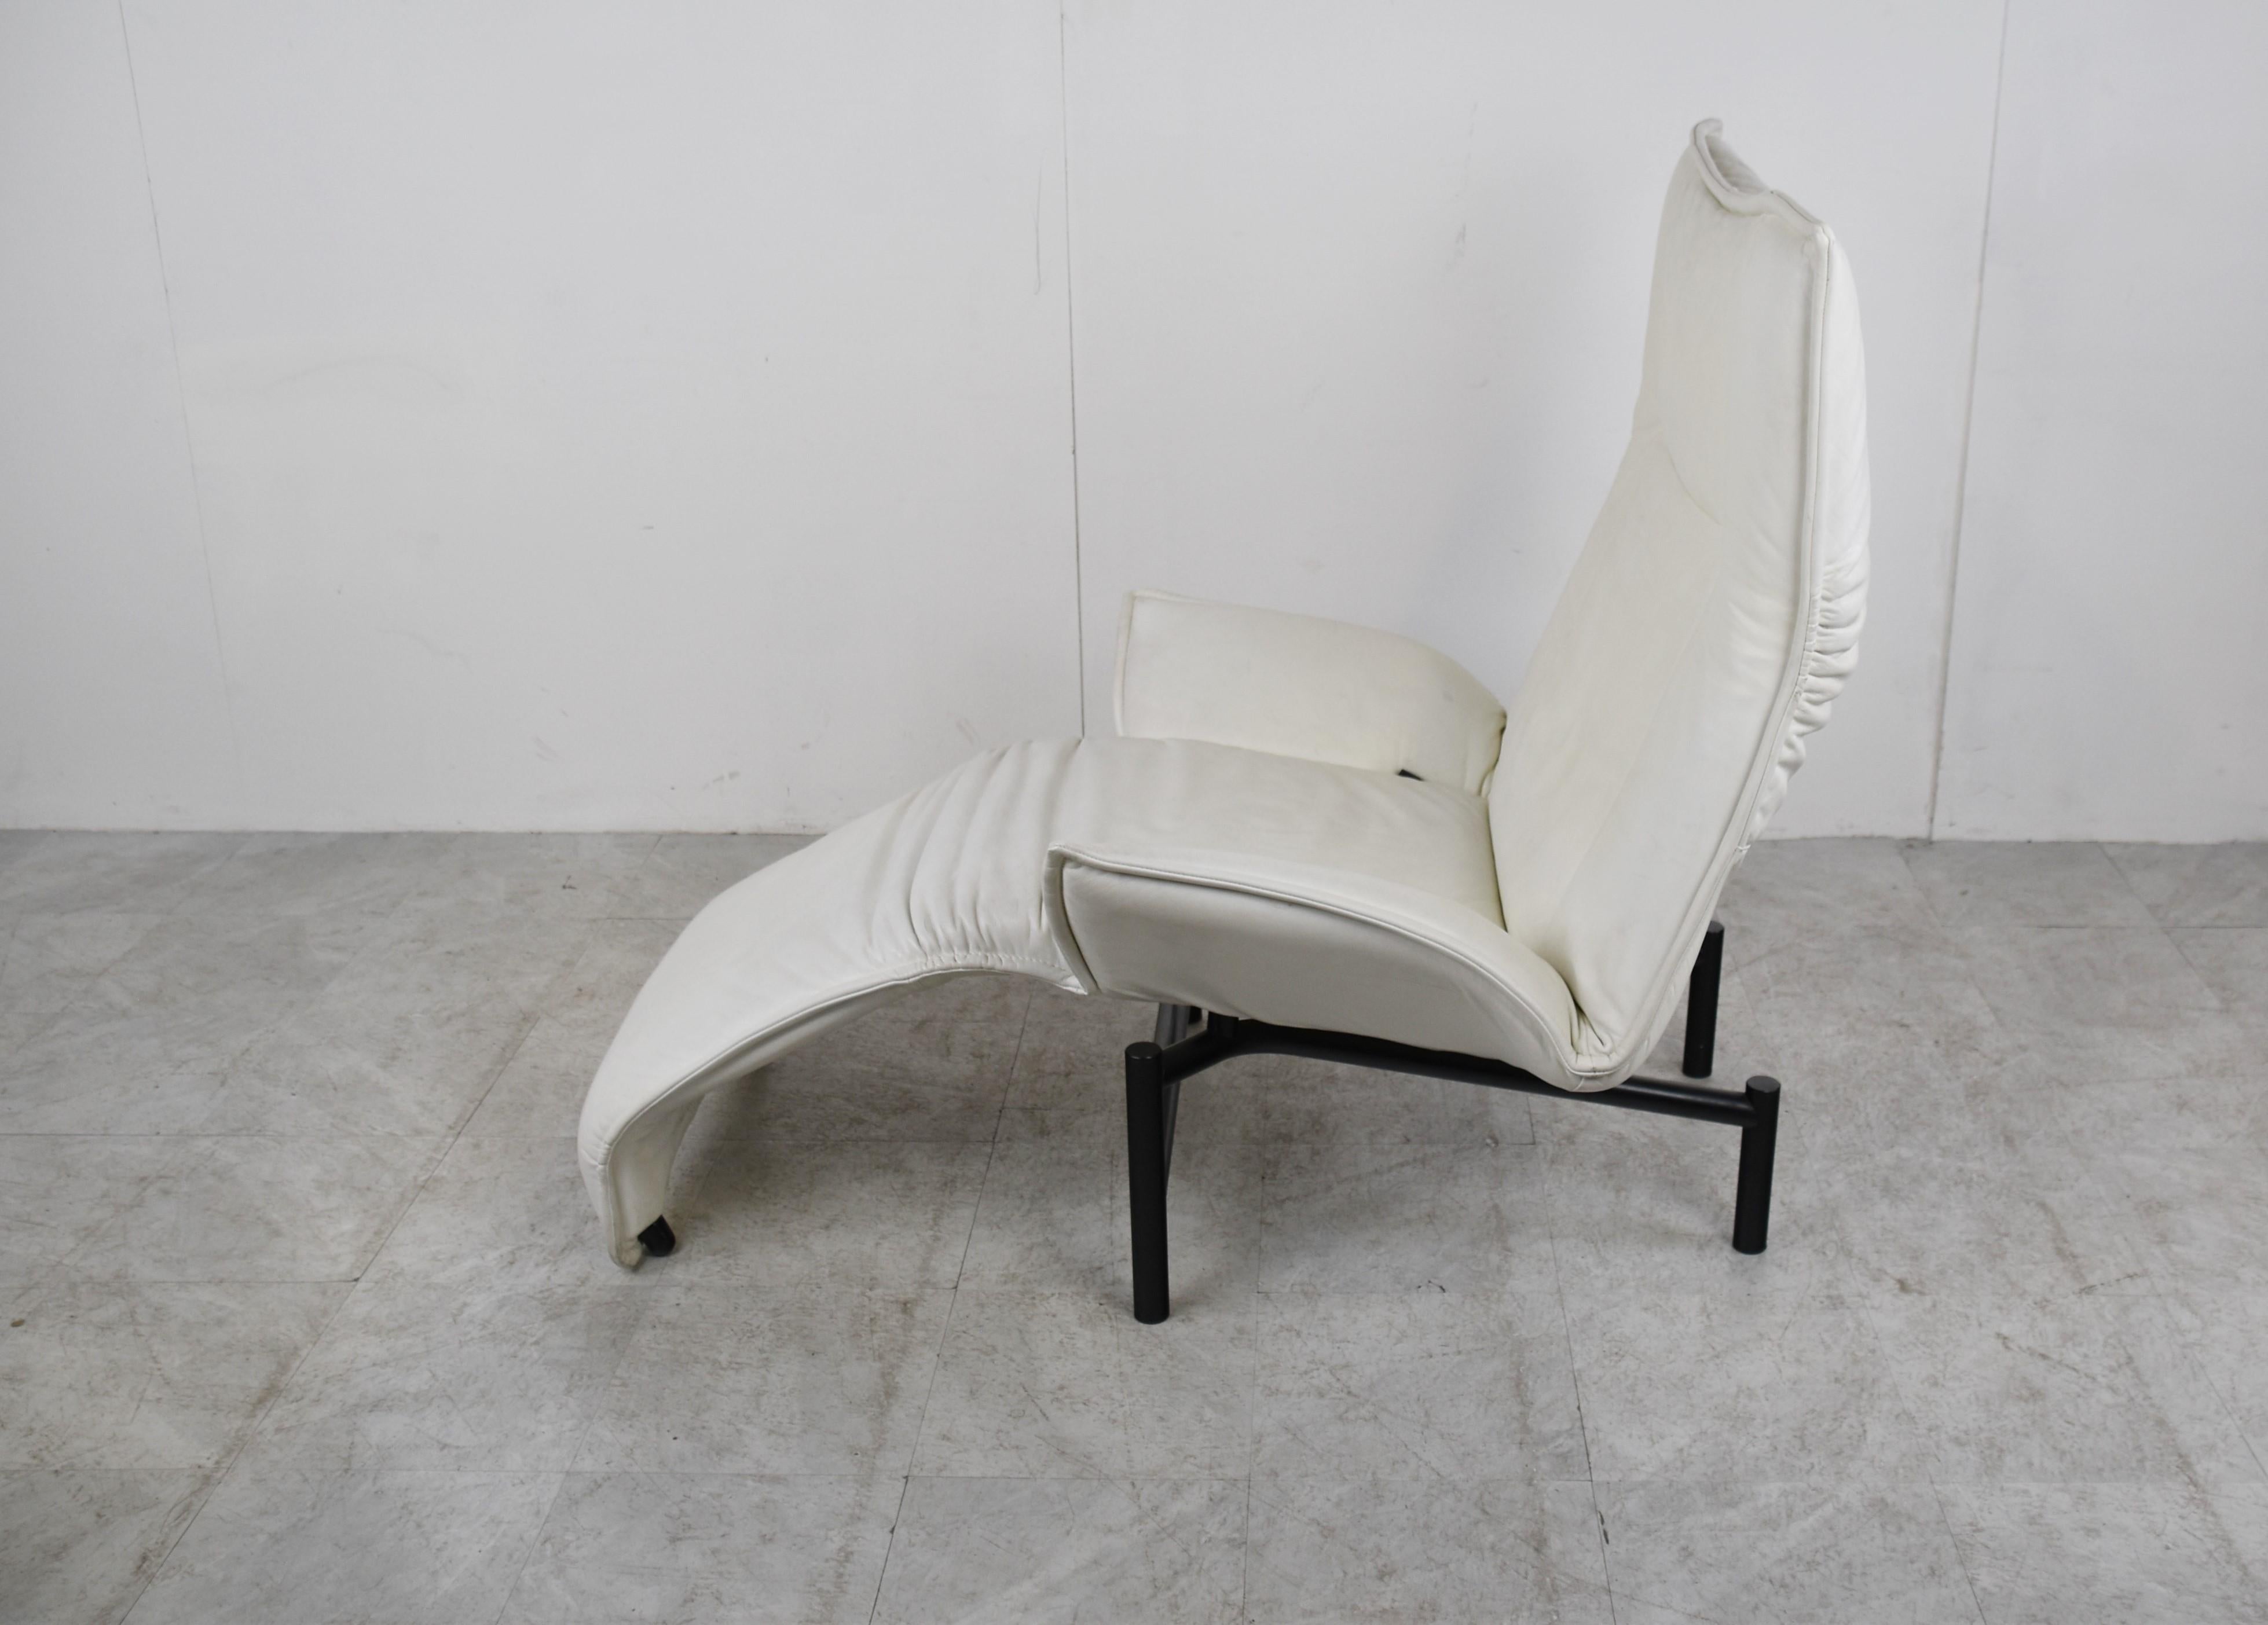 Vintage Leather Veranda Lounge Chair by Vico Magistretti for Cassina, 1980s For Sale 7